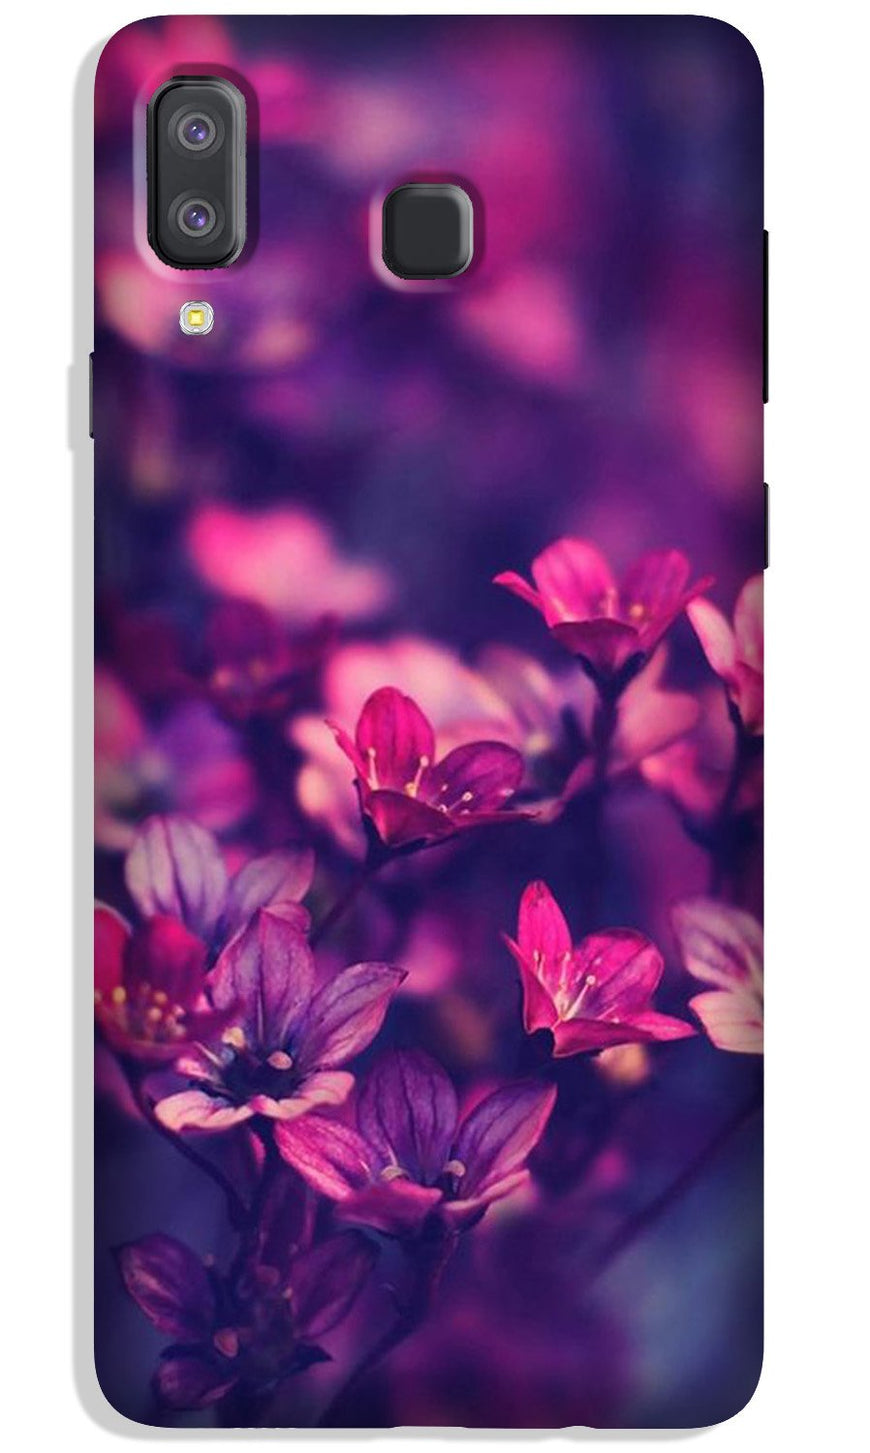 flowers Case for Galaxy A8 Star